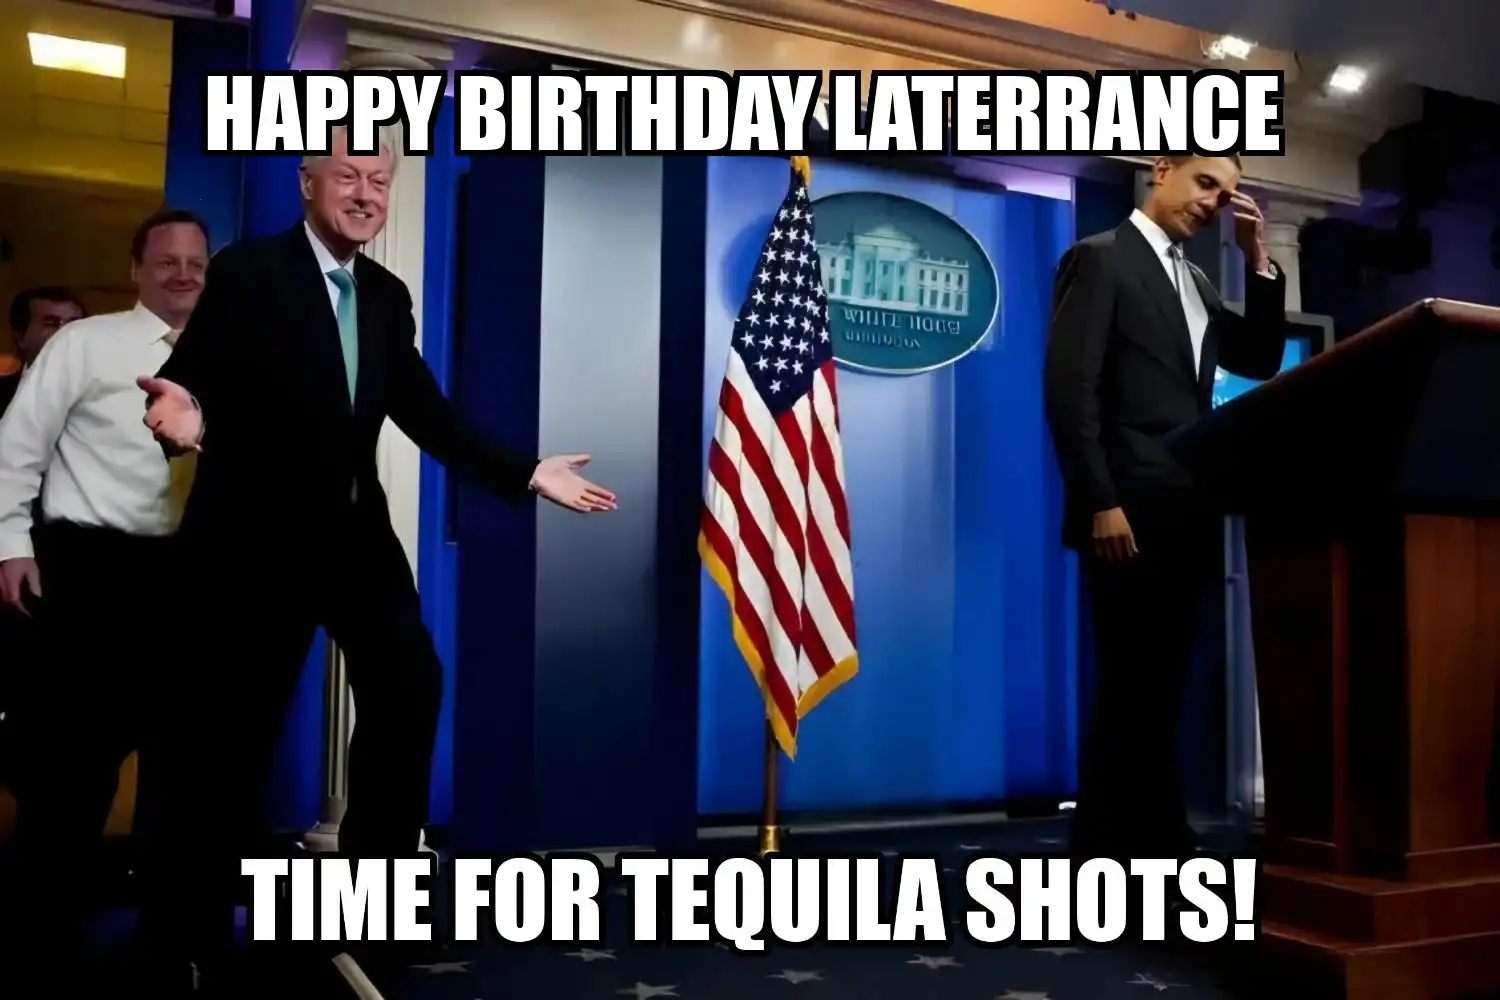 Happy Birthday Laterrance Time For Tequila Shots Memes